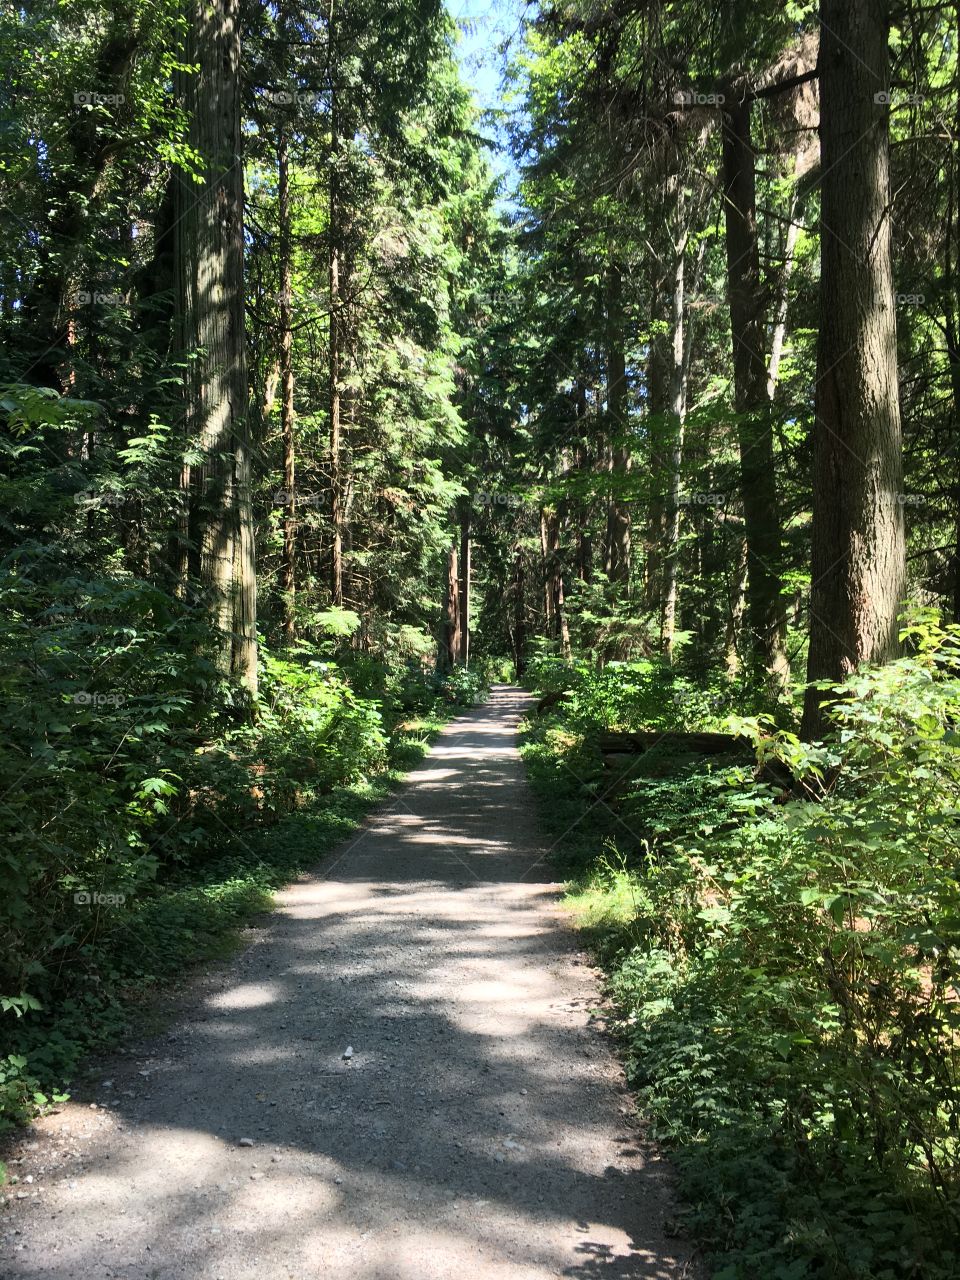 Forest trail in Stanley Park, Vancouver BC. A place of peace and quiet away from the crowds.